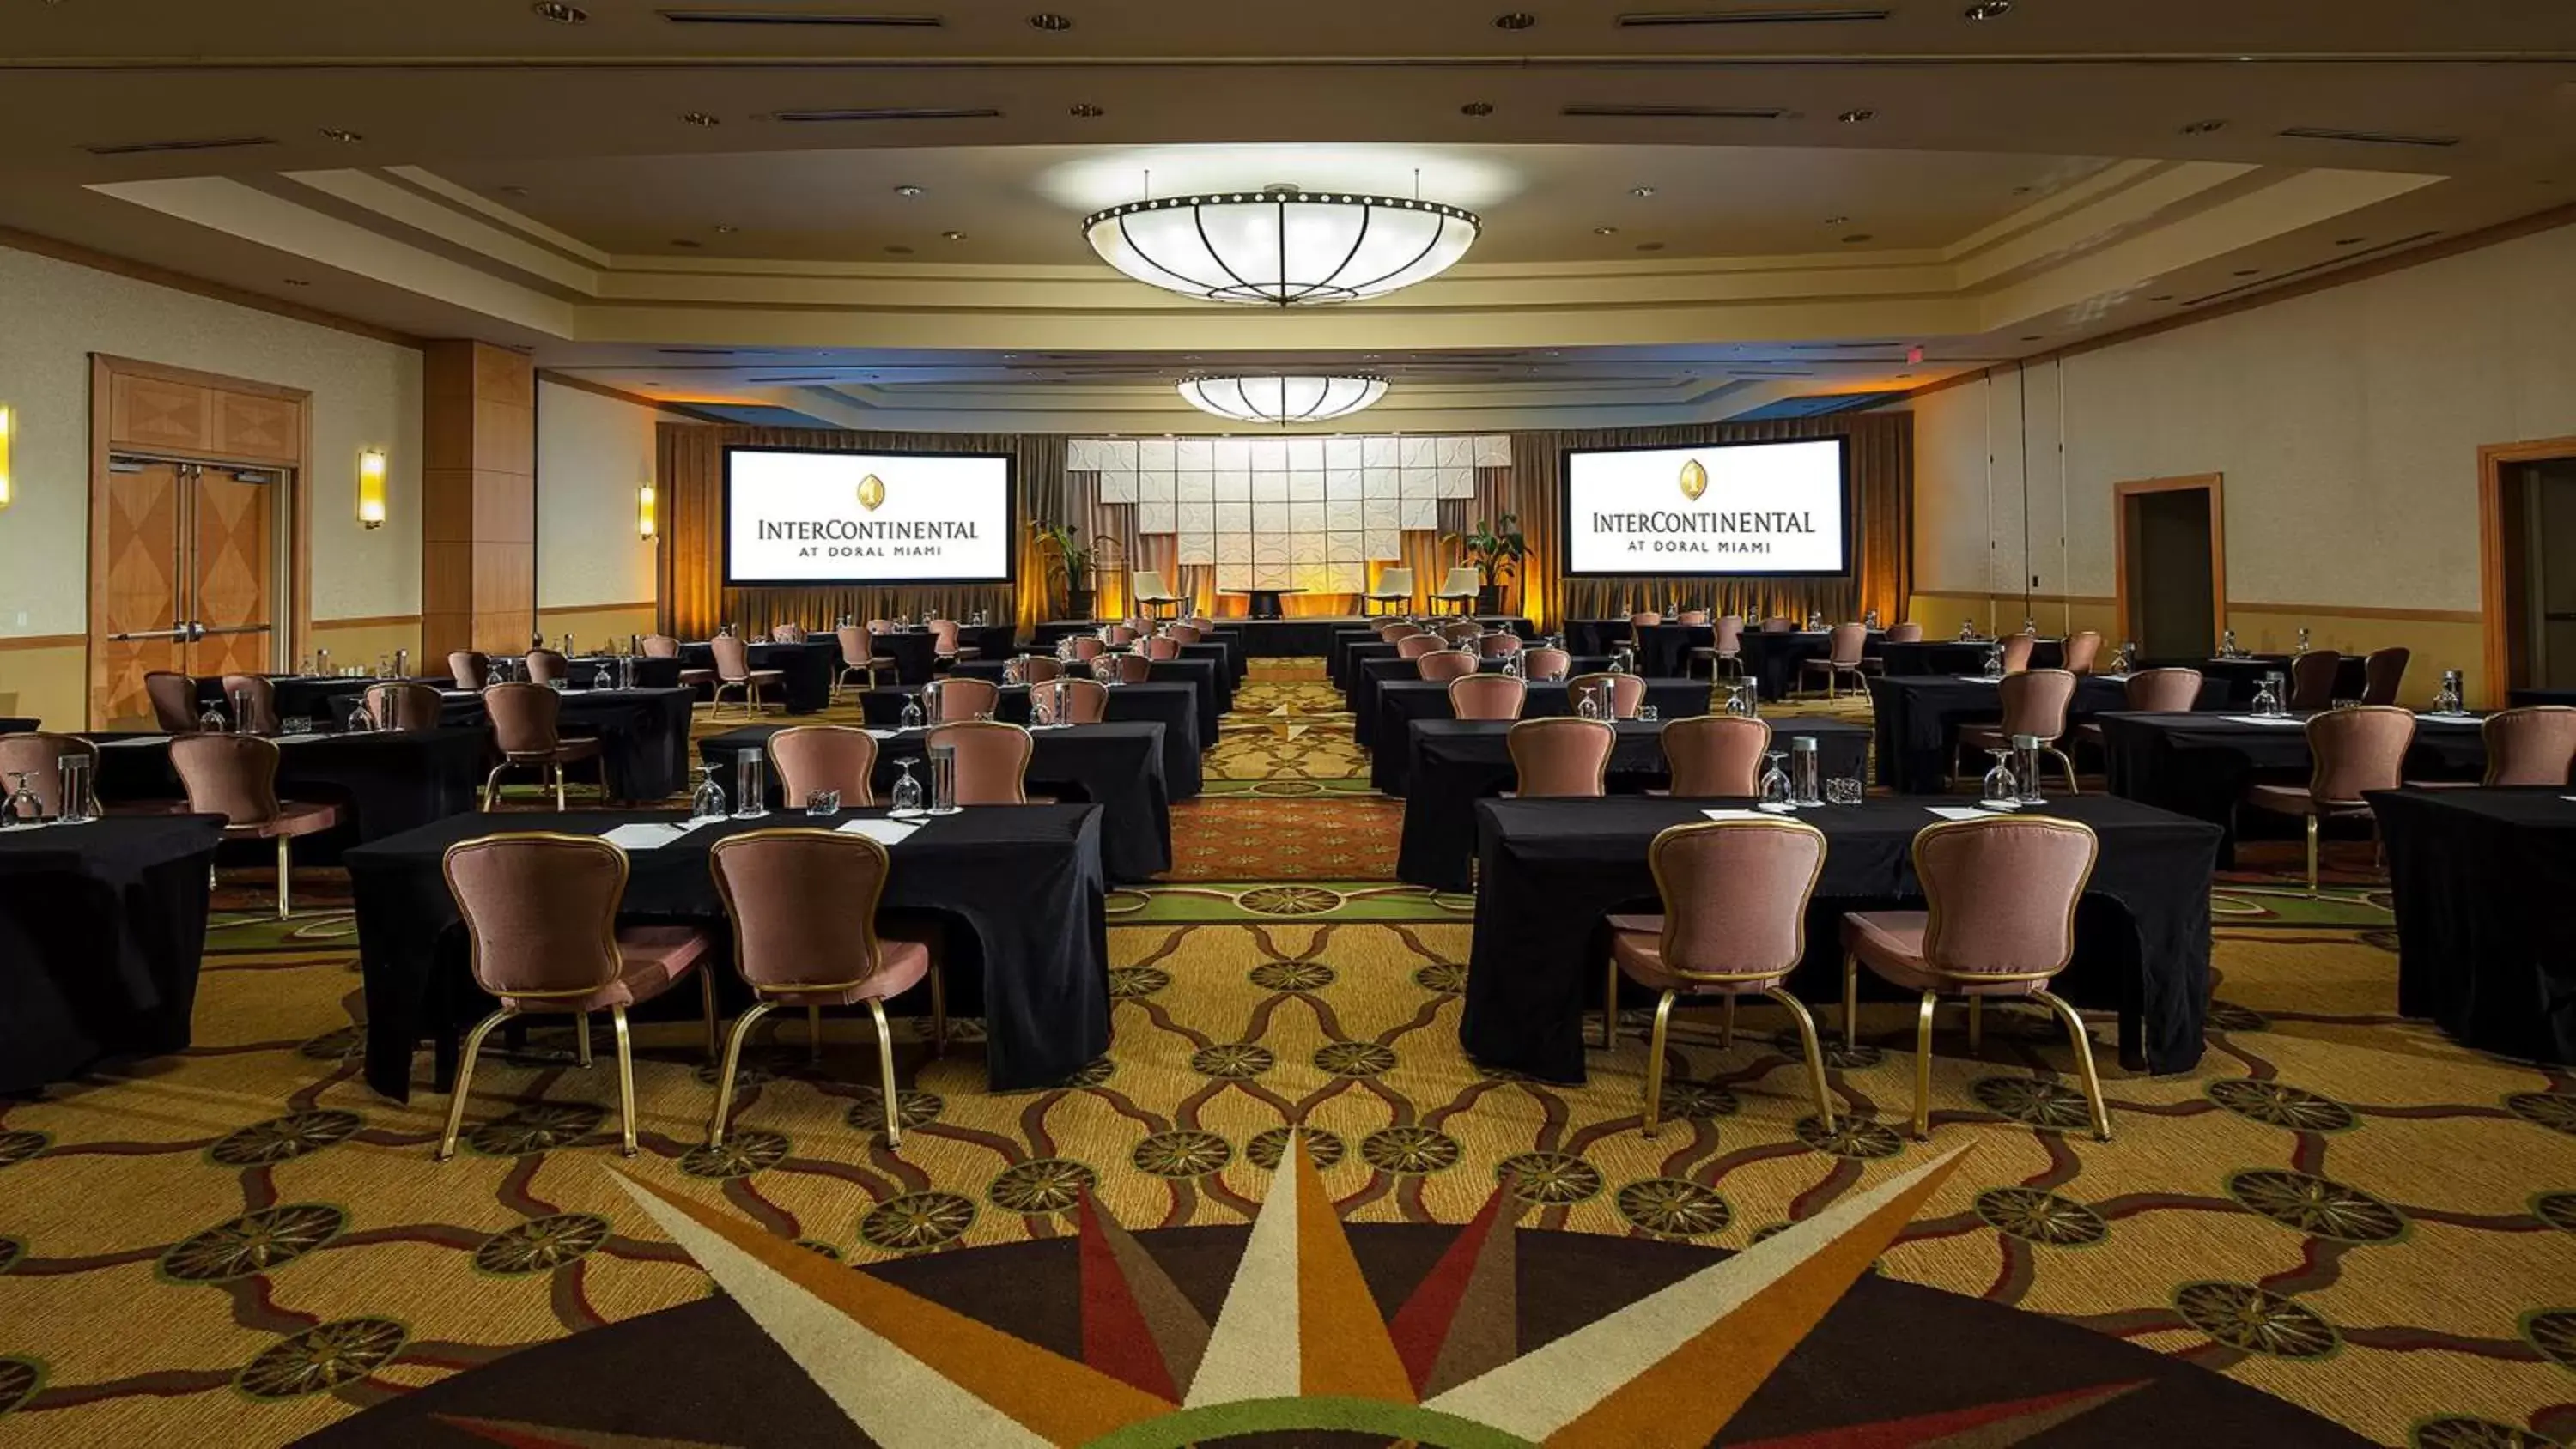 Meeting/conference room in InterContinental at Doral Miami, an IHG Hotel